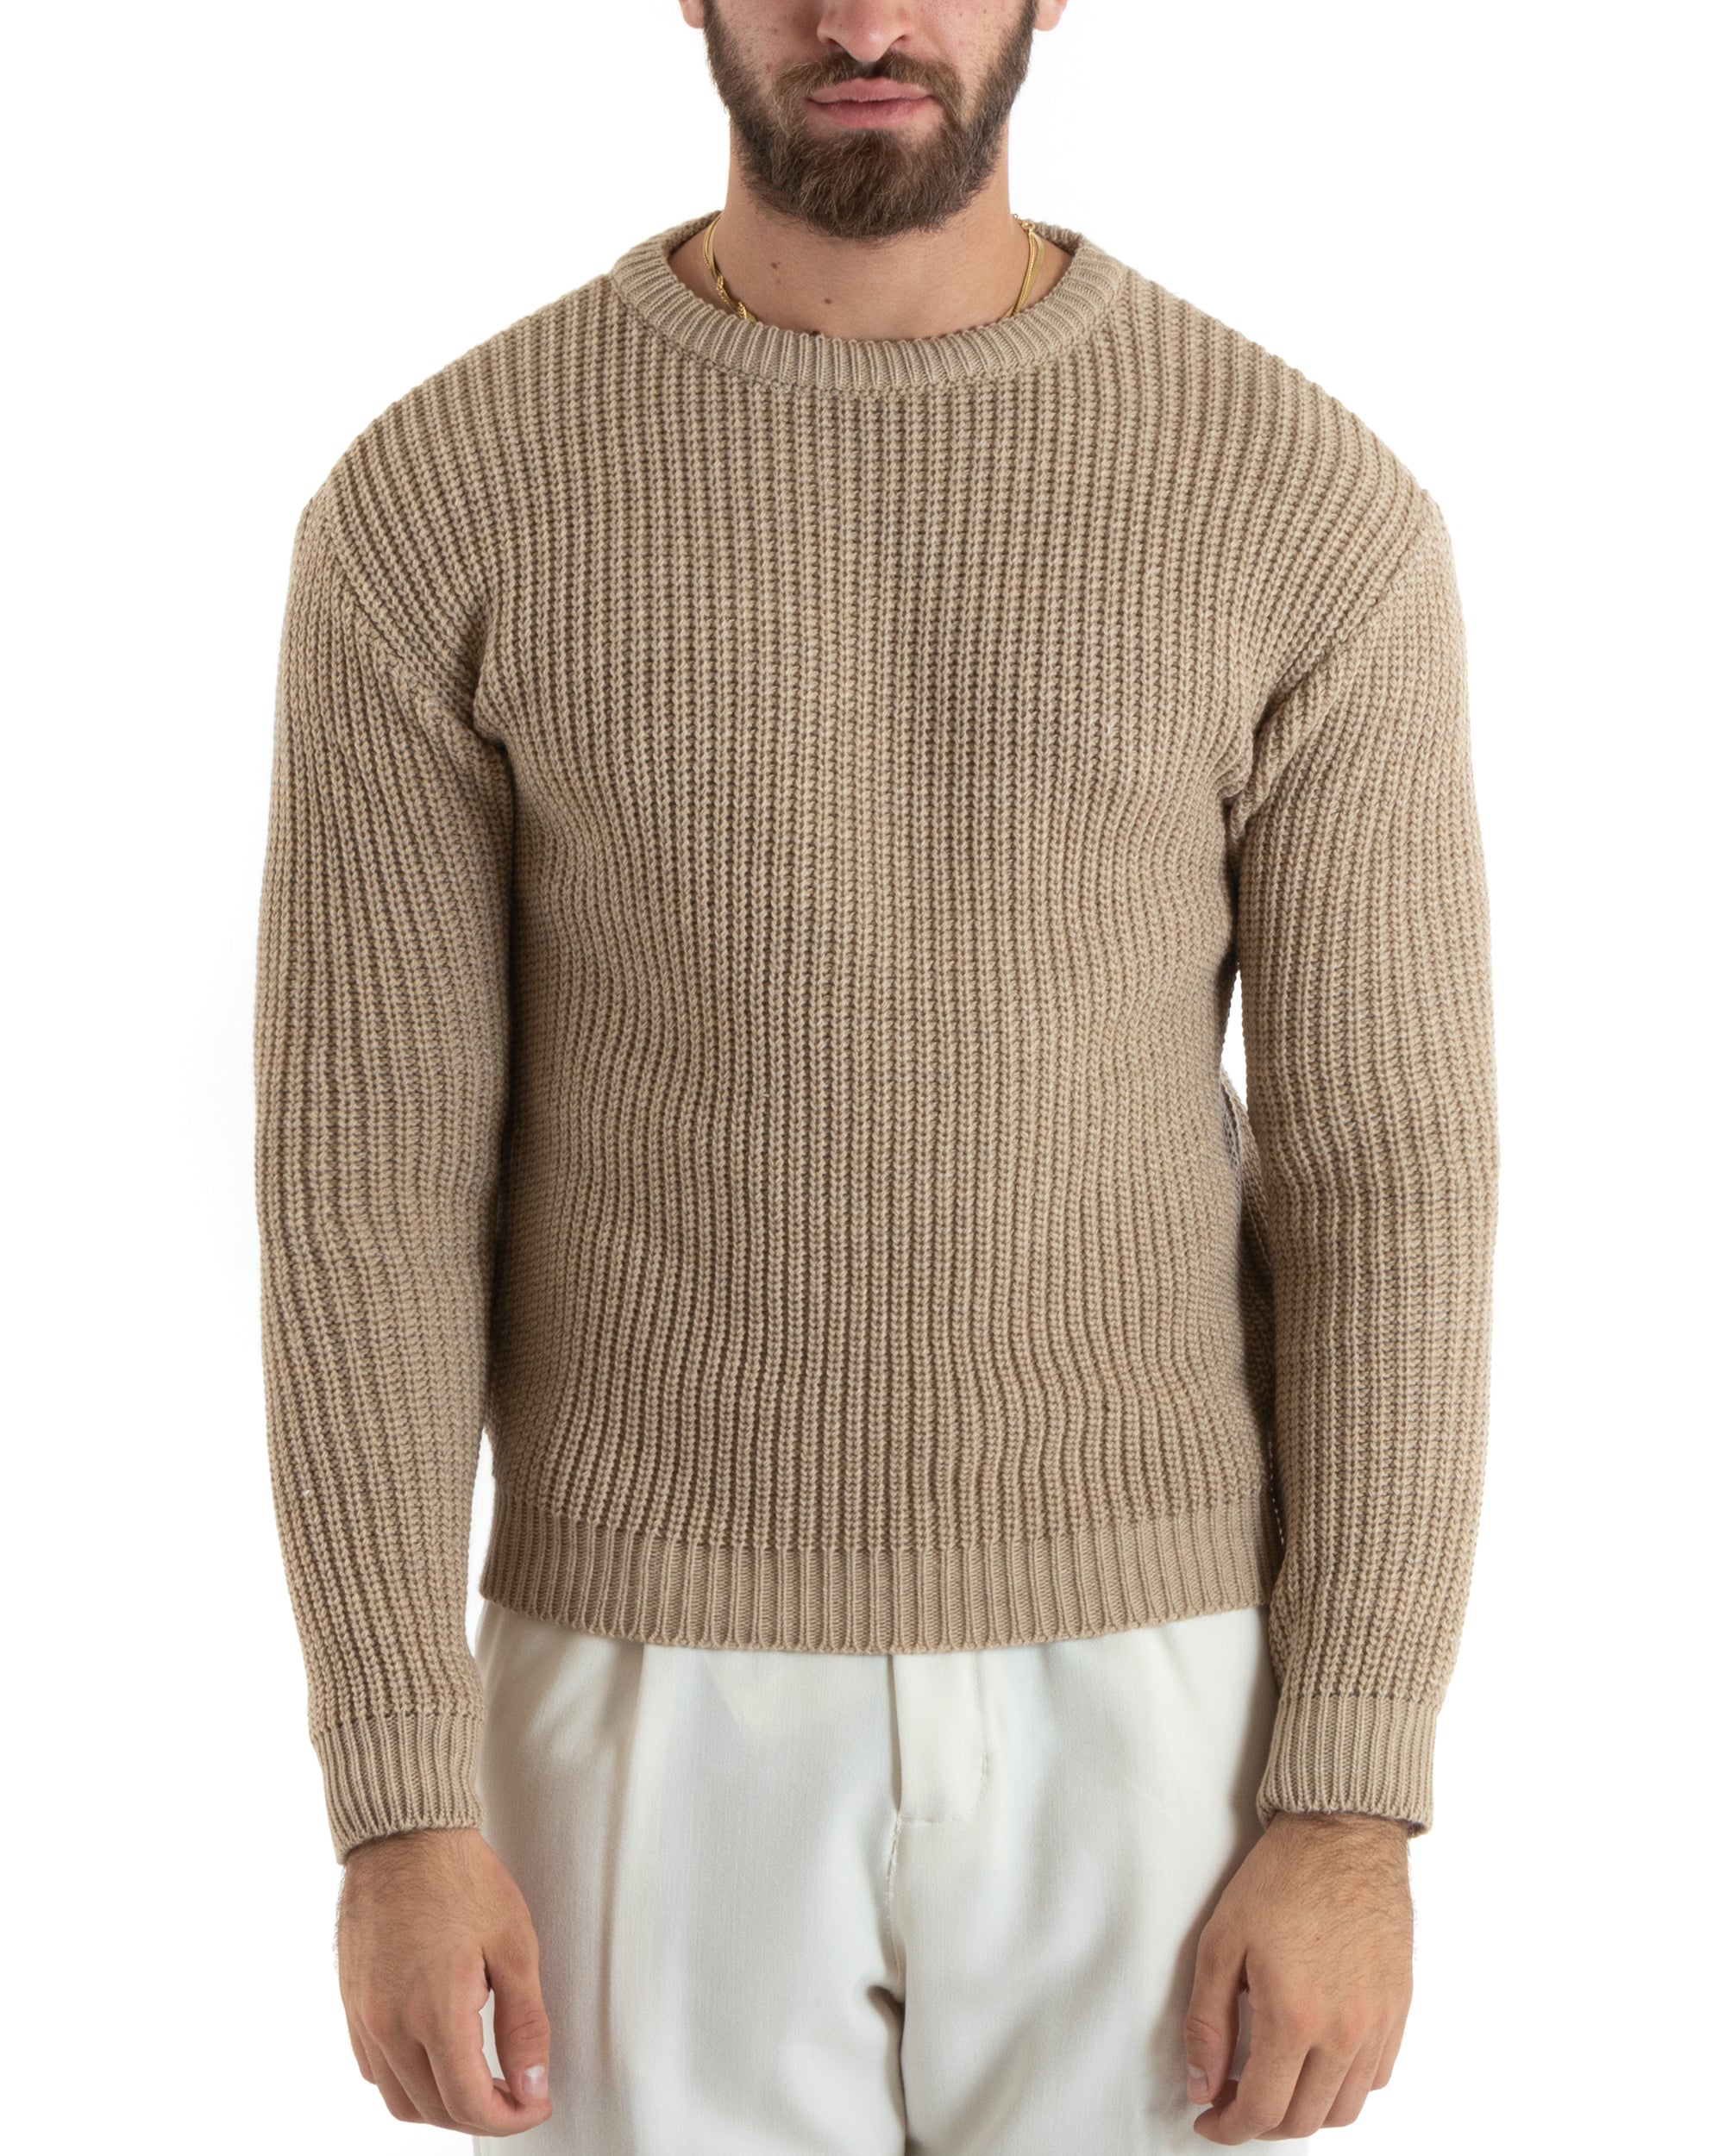 Paul Barrell Men's Pullover Sweater Solid Color Beige Crewneck Casual GIOSAL M2359A